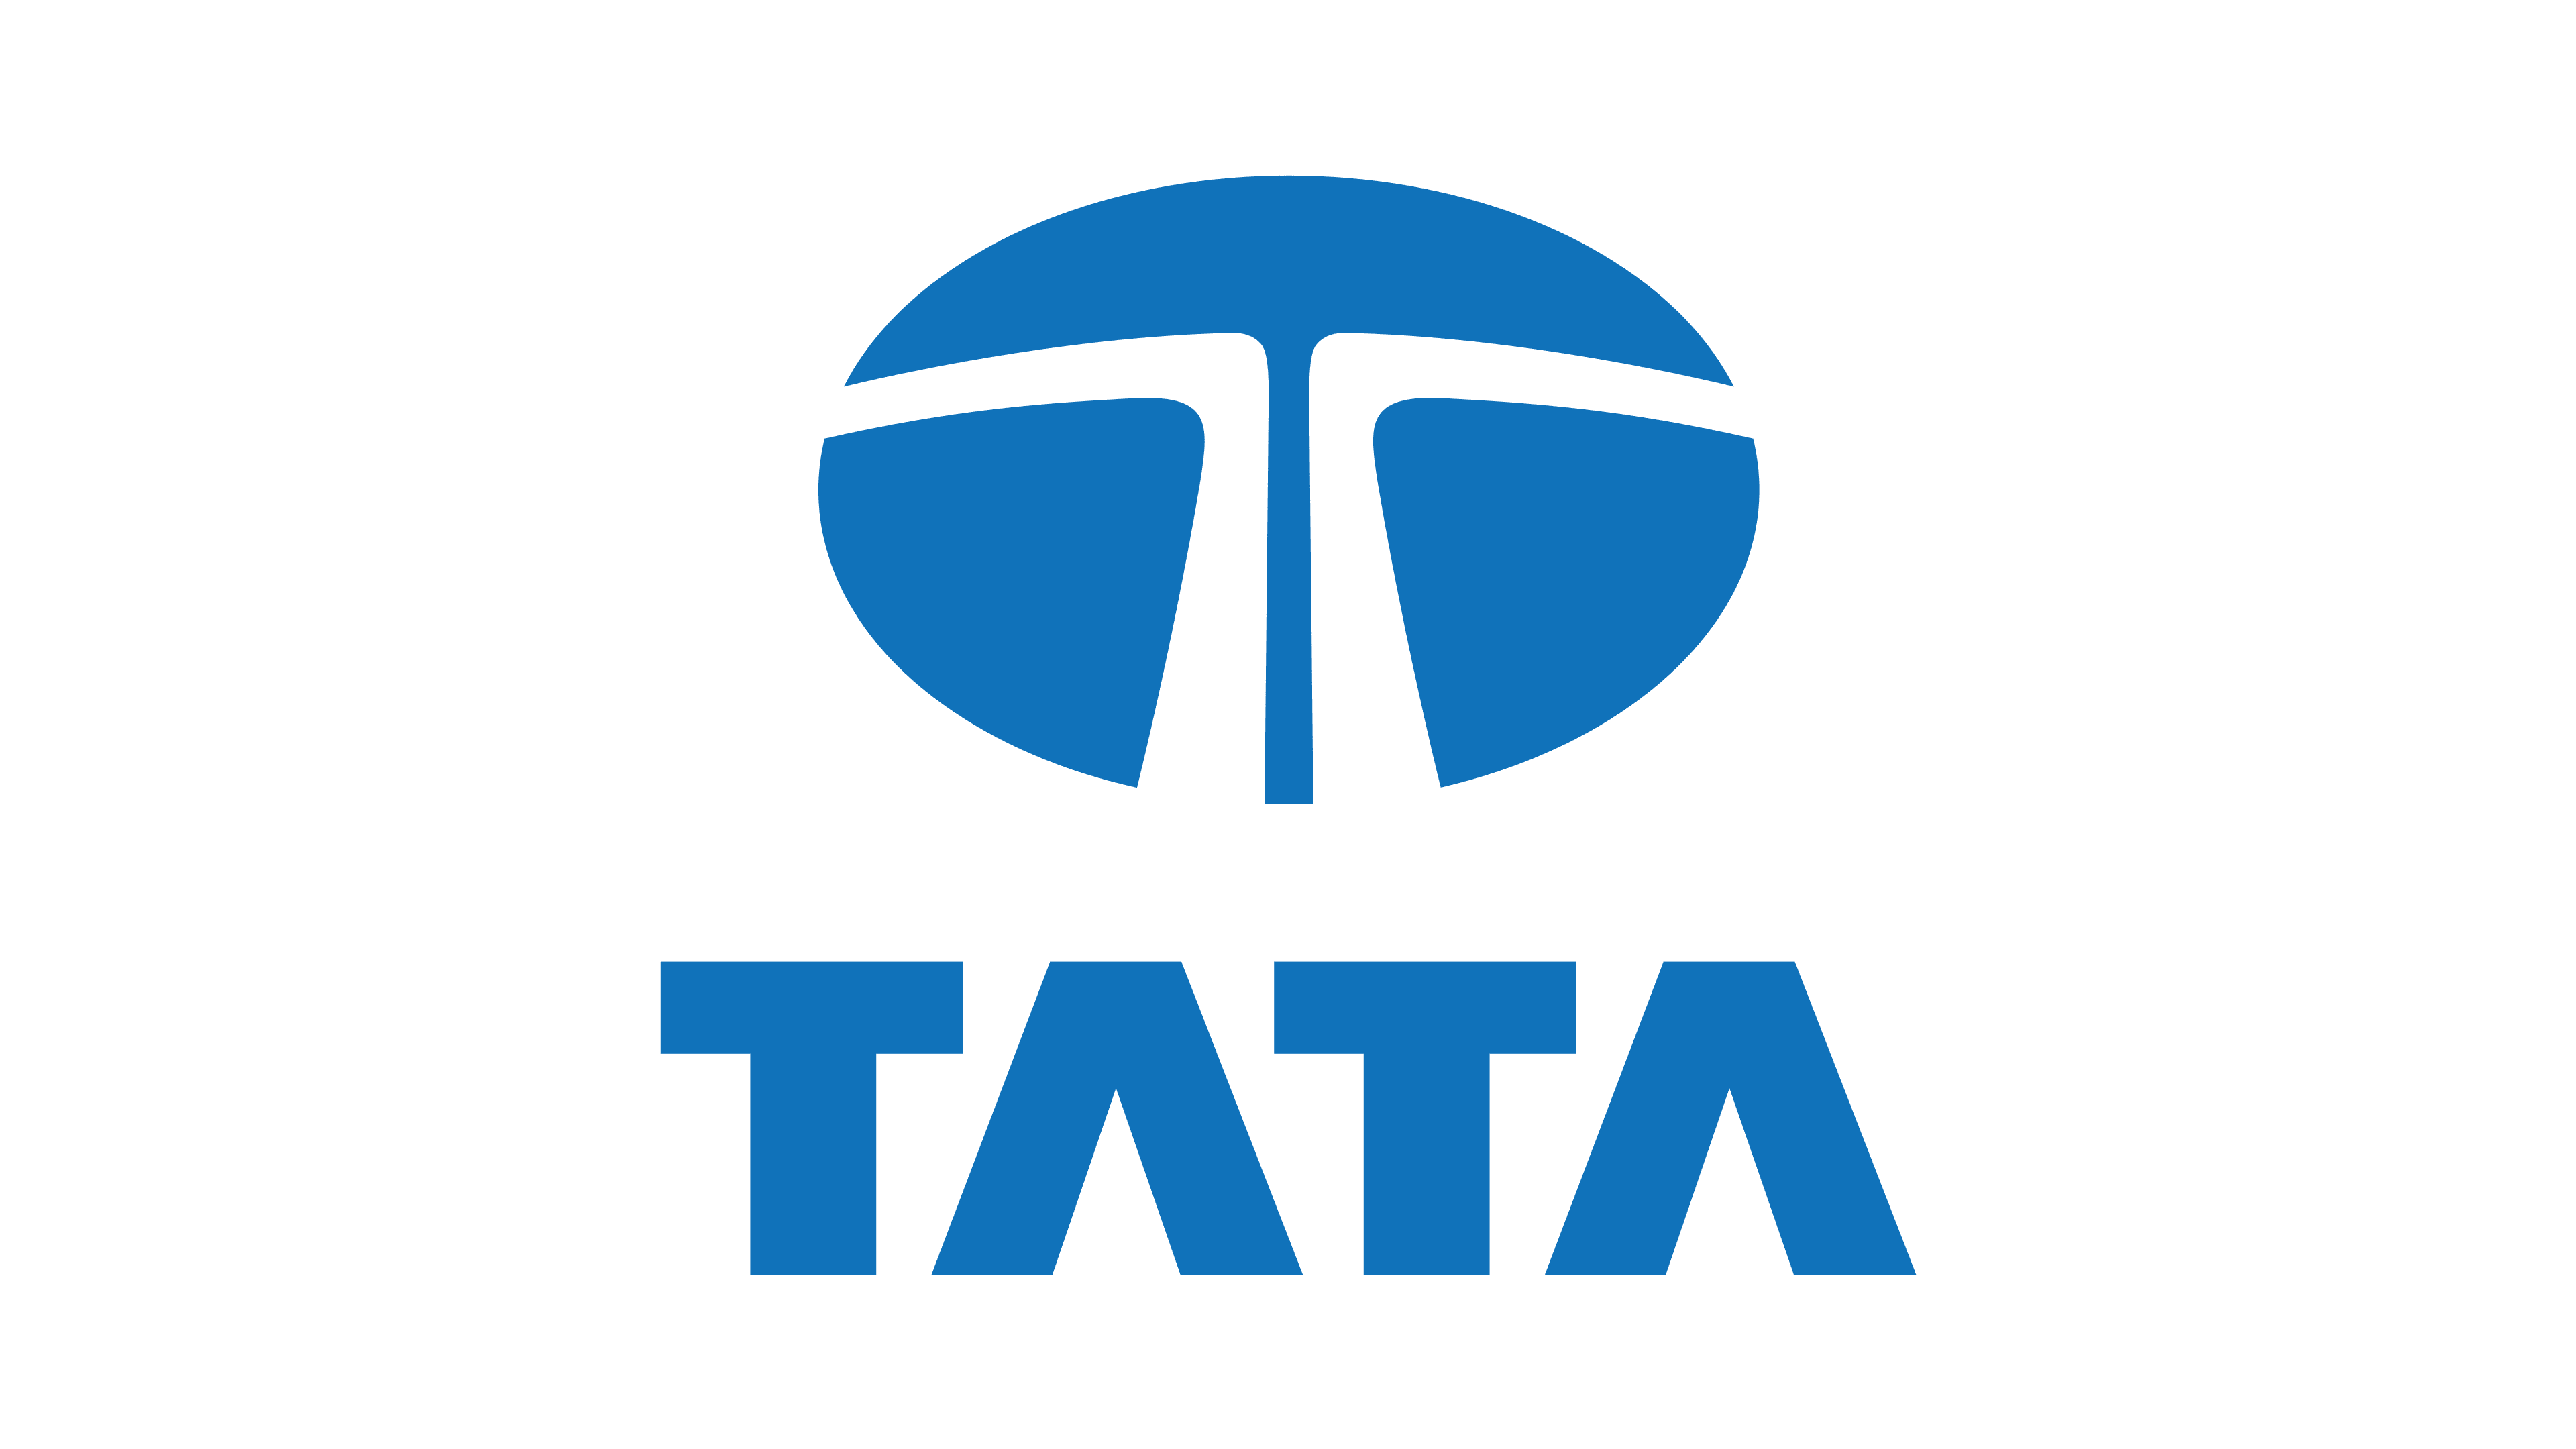 Our client Tata group